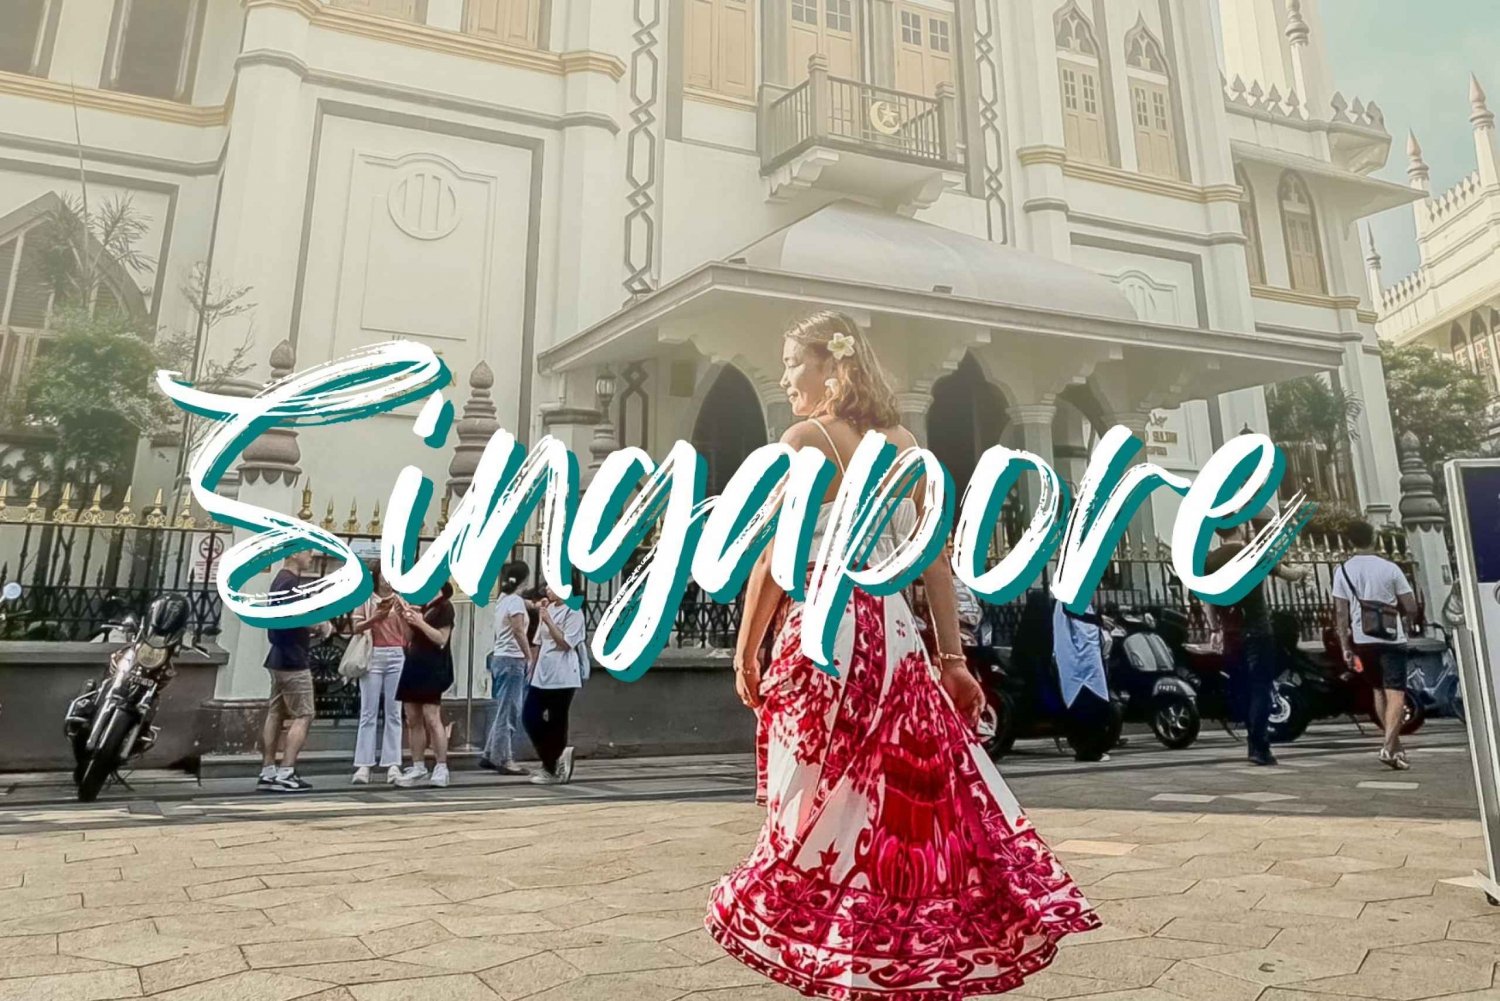 Singapore Package 2: With USS + Half Day City Tour